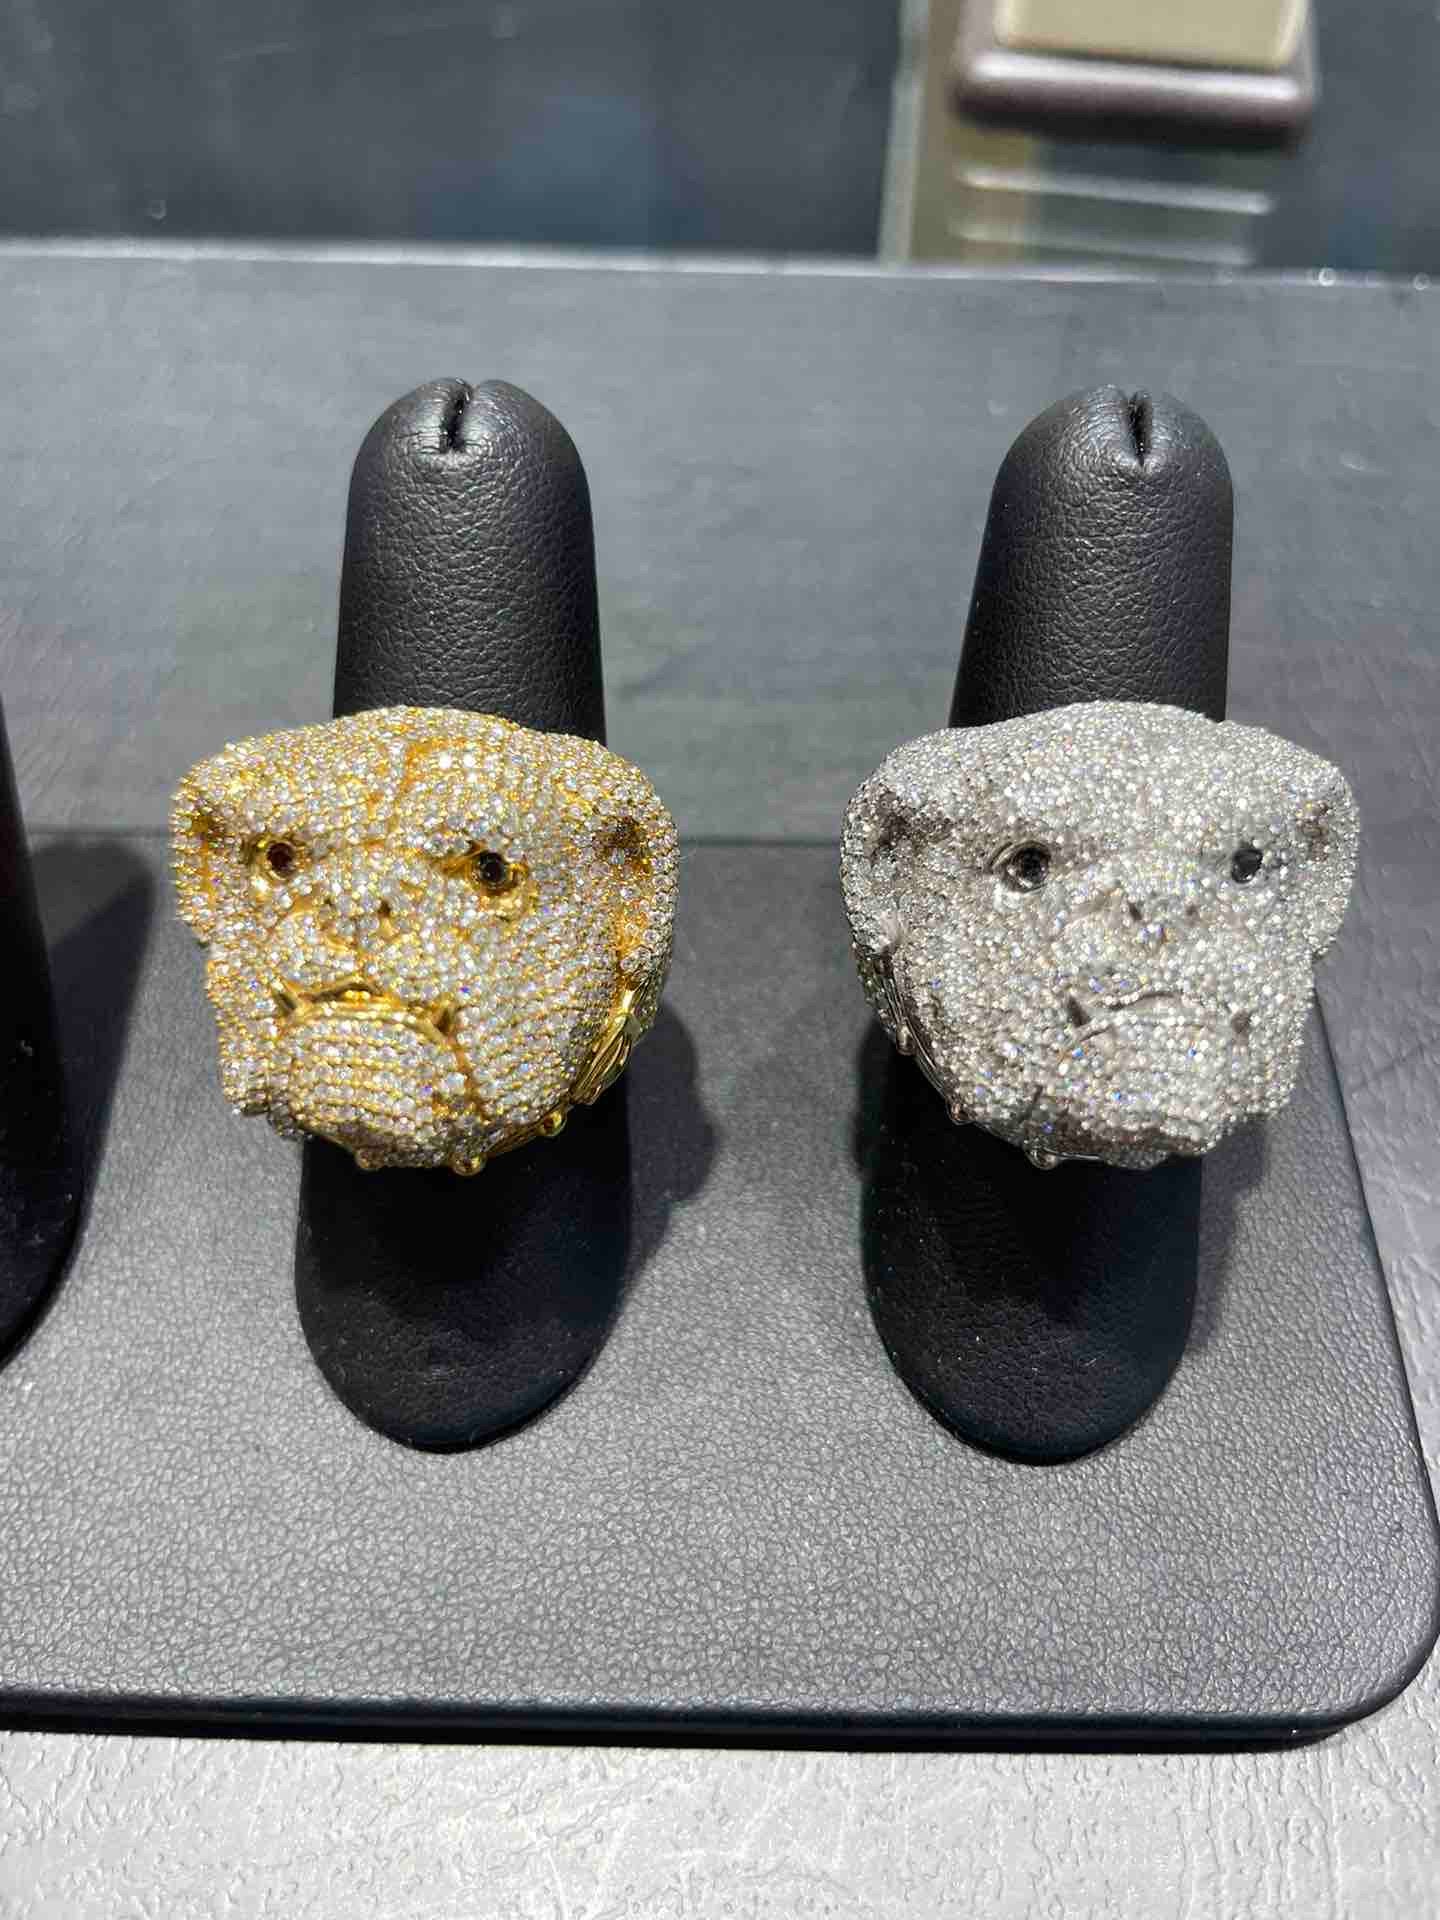 Custom made Iced 14k Bull Dog Bust Down Ring with 5.6cts (1,170 pcs, F+)of VS1 Natural Diamonds and 58 grams of 14k gold